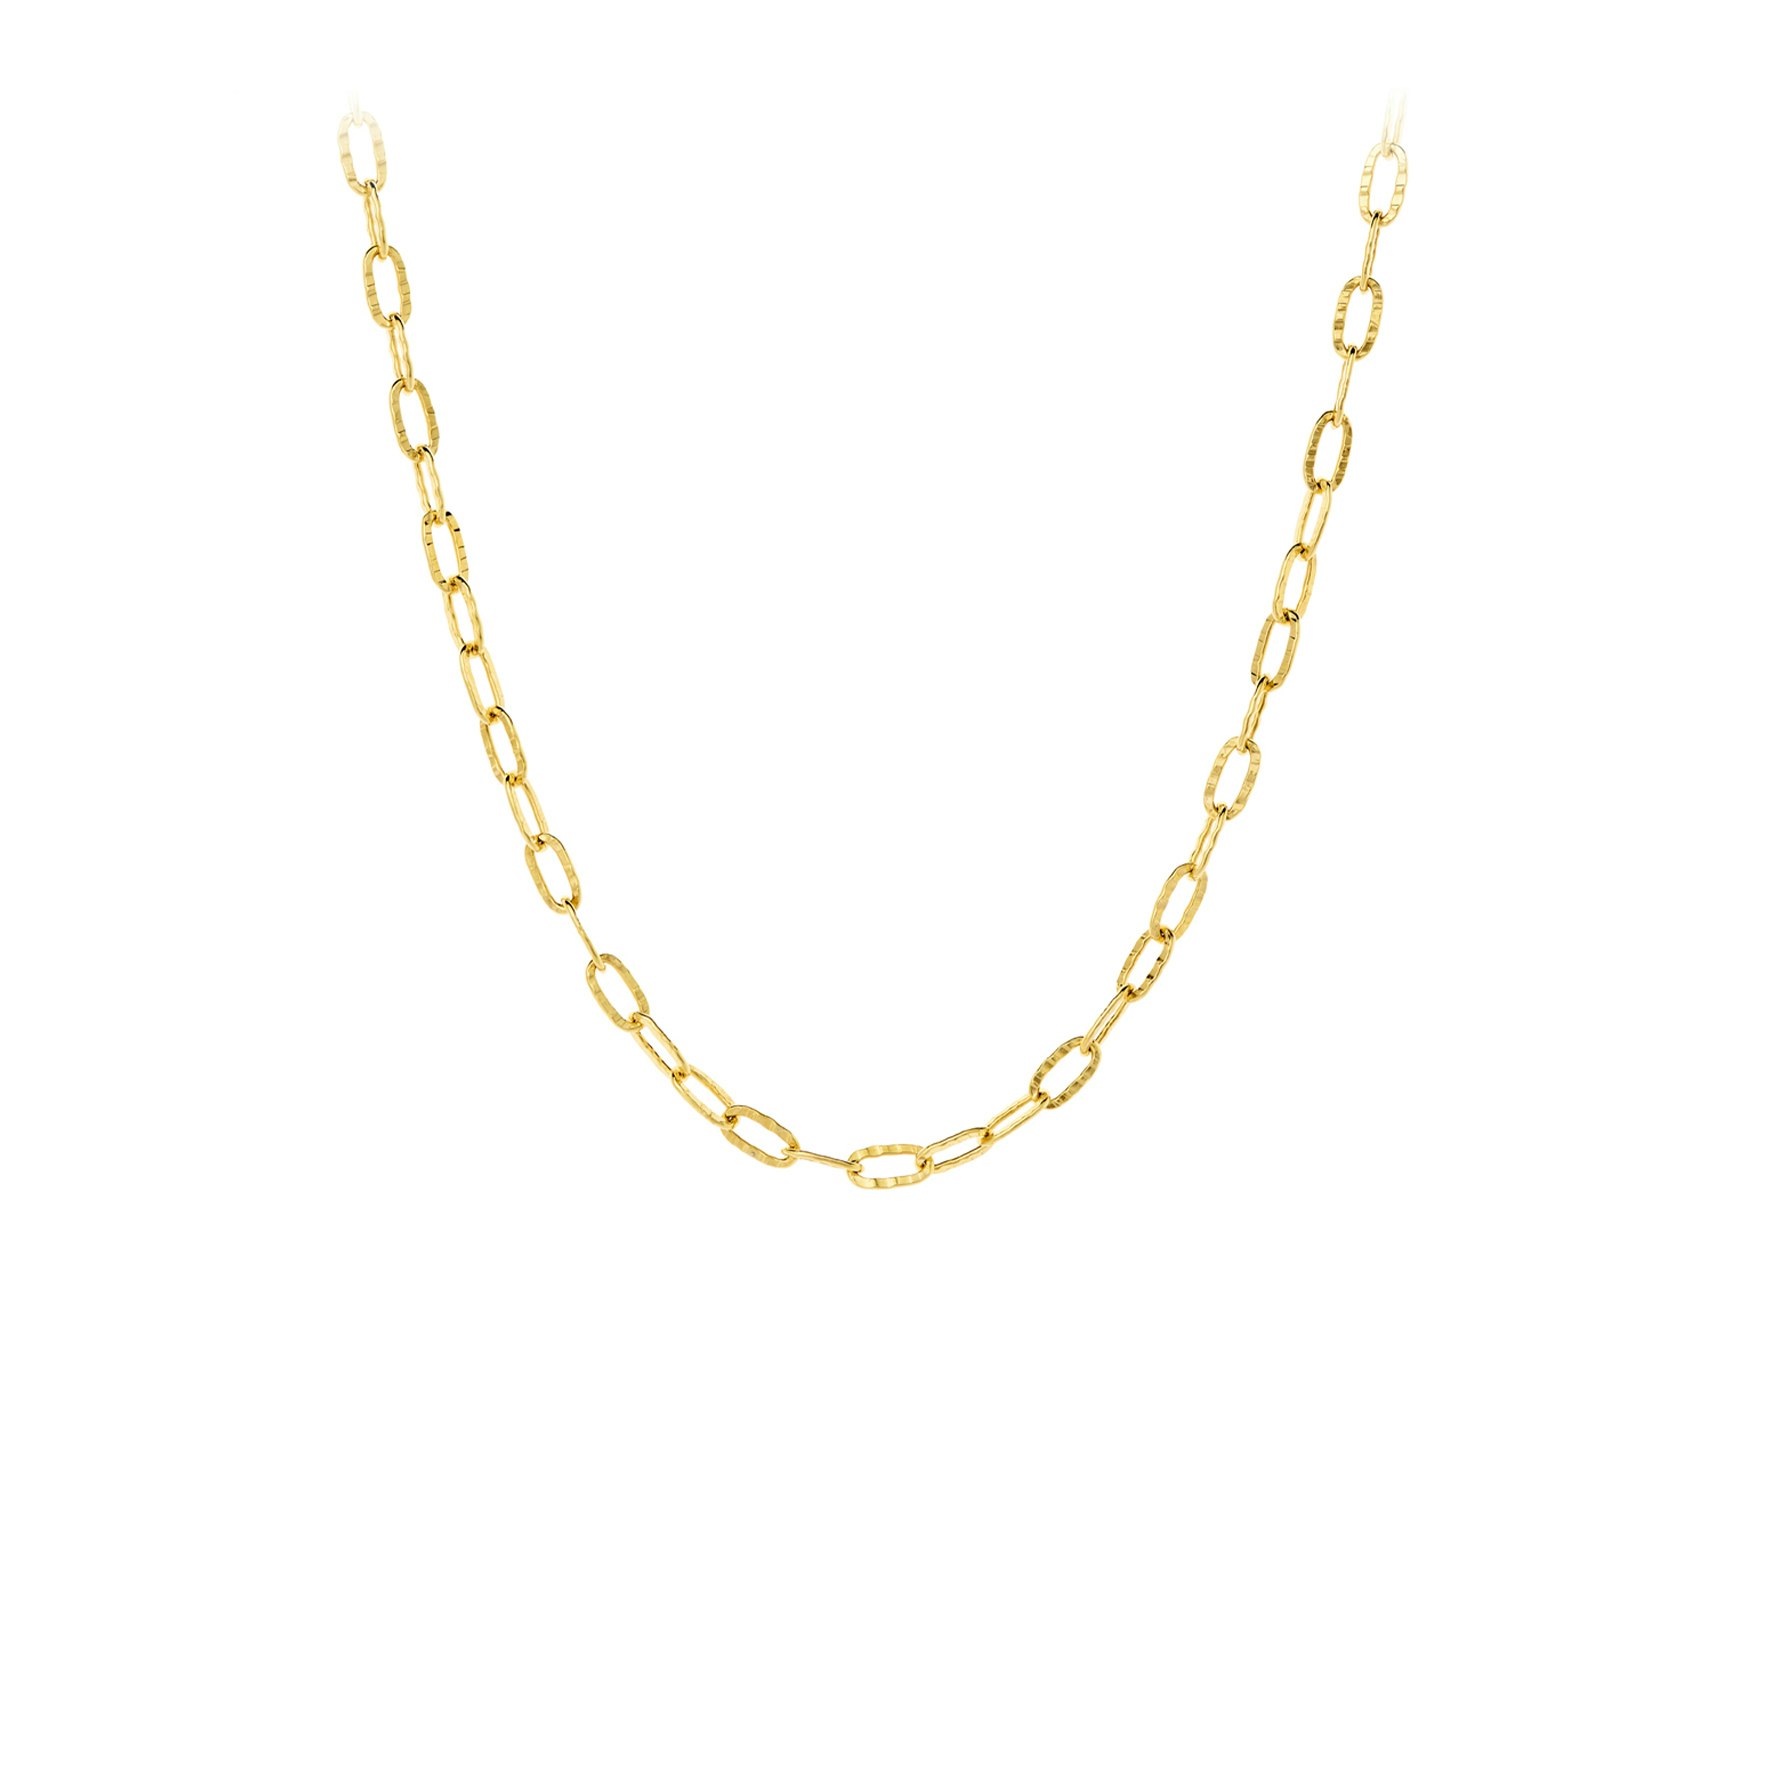 Alba Necklace from Pernille Corydon in Goldplated-Silver Sterling 925